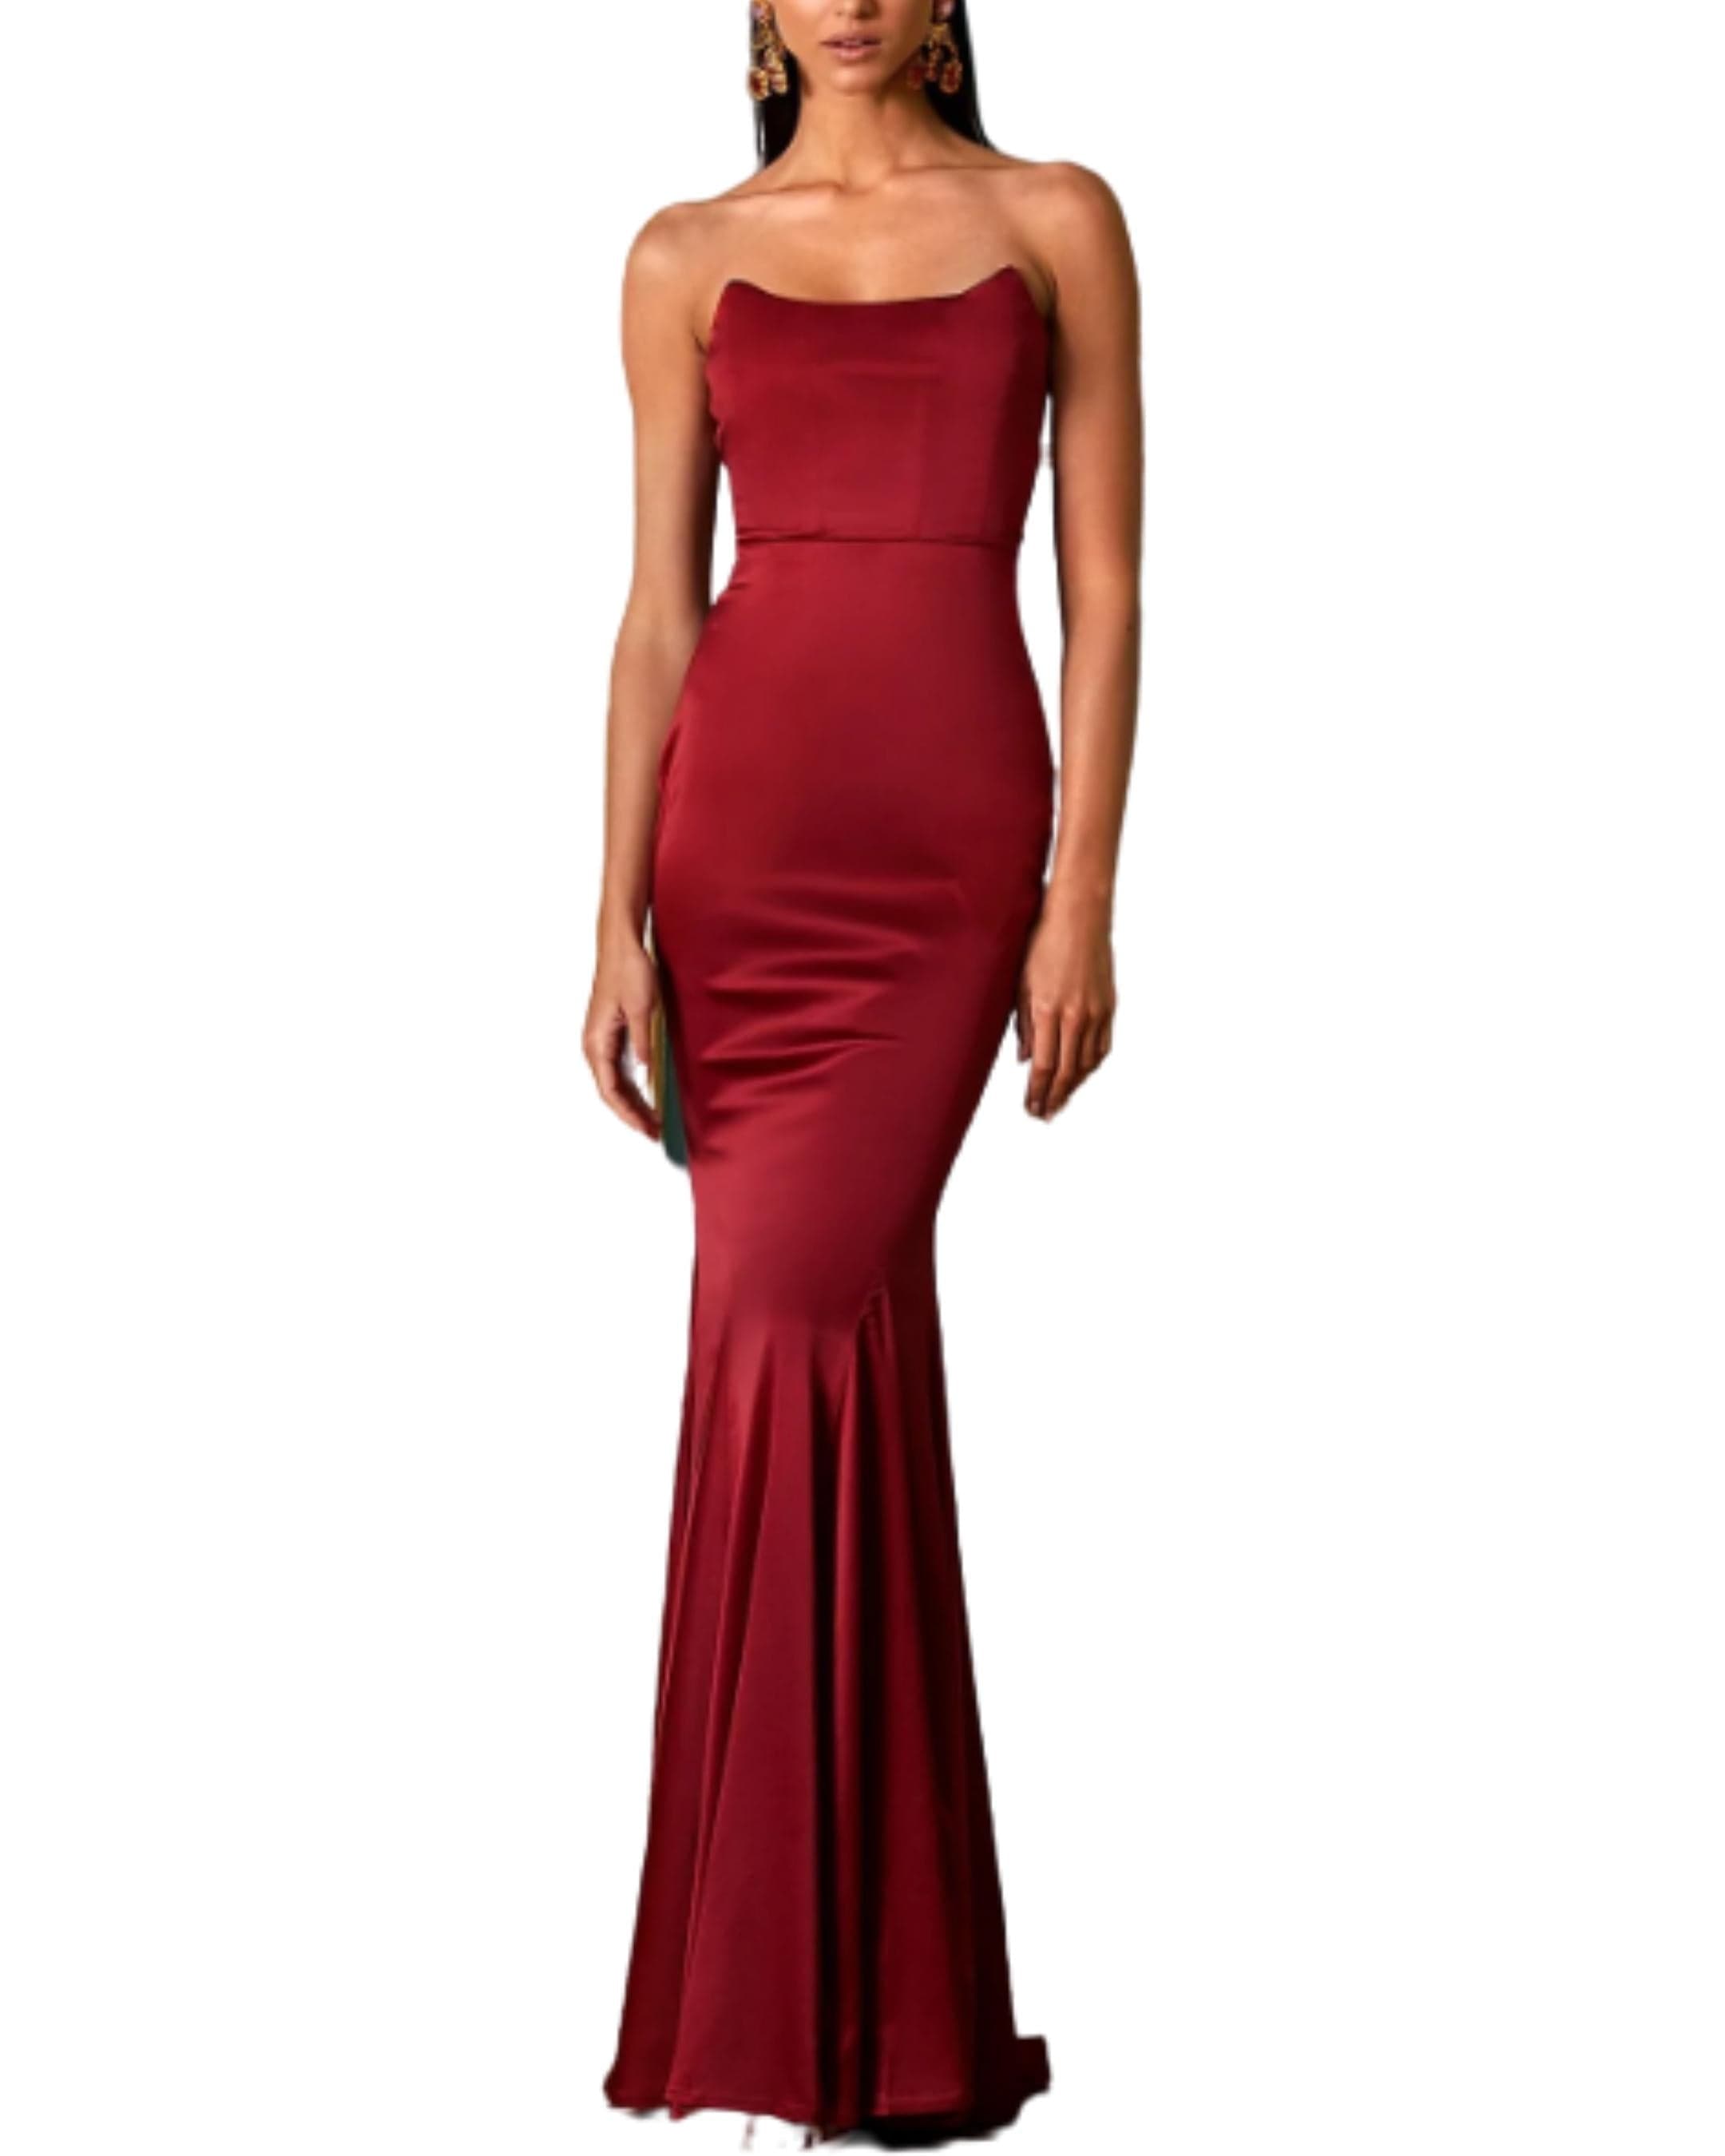 Dione Strapless Gown in Wine Red